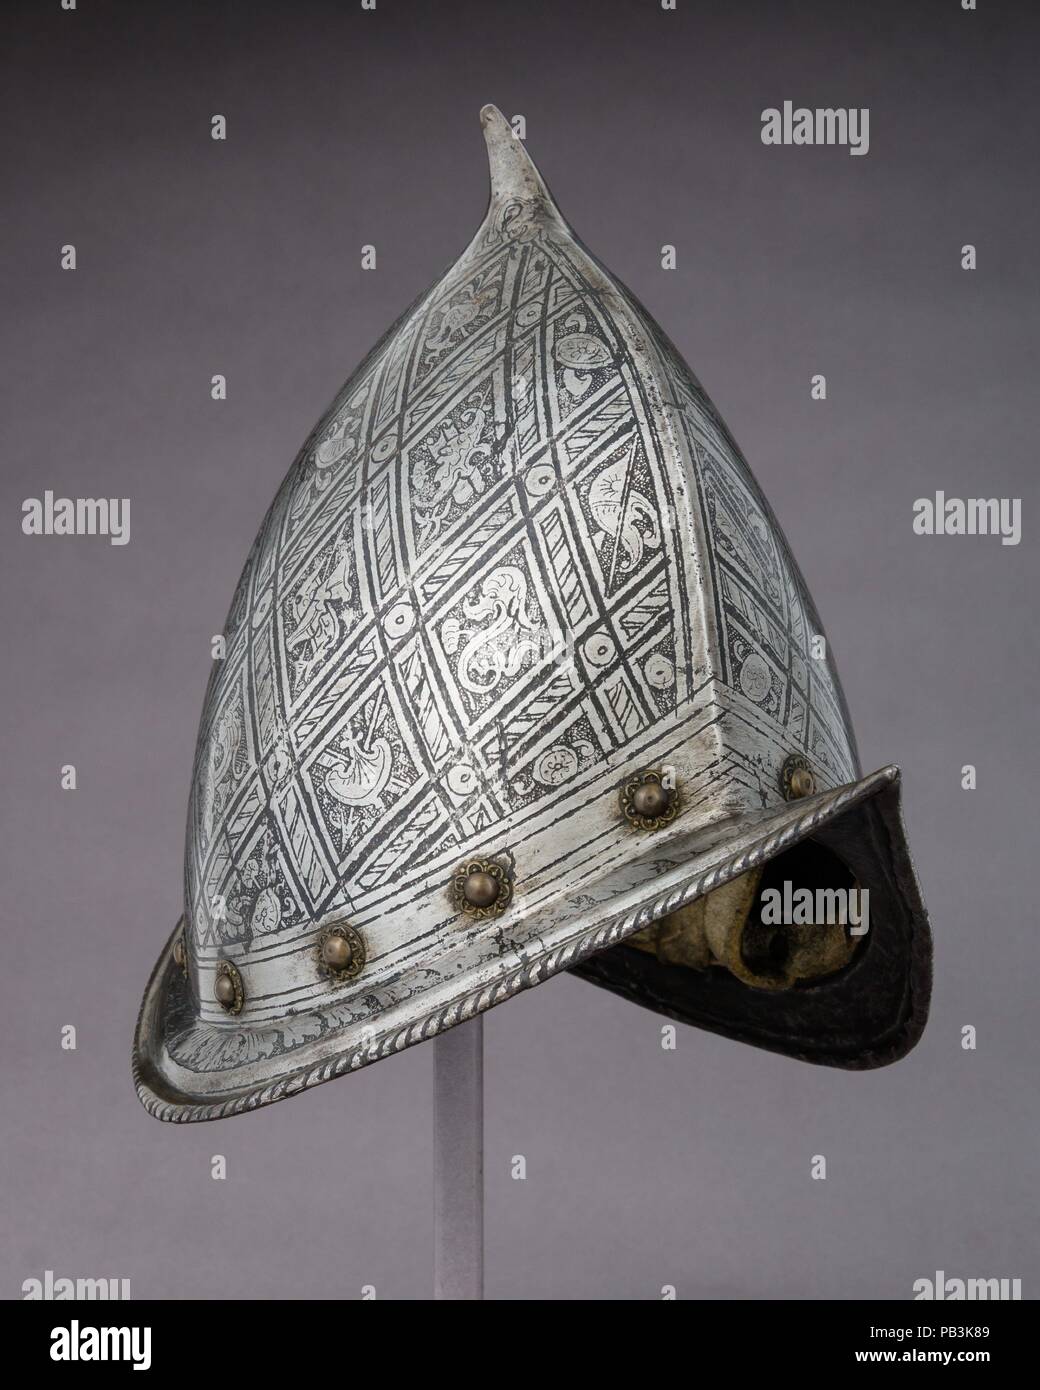 Morion-Cabasset. Culture: Italian. Dimensions: H. 11 in. (27.9 cm); W. 8 3/8 in. (21.3 cm); D. 14 in. (35.6 cm); Wt. 3 lb. 7 oz. (1555 g). Date: ca. 1575. Museum: Metropolitan Museum of Art, New York, USA. Stock Photo